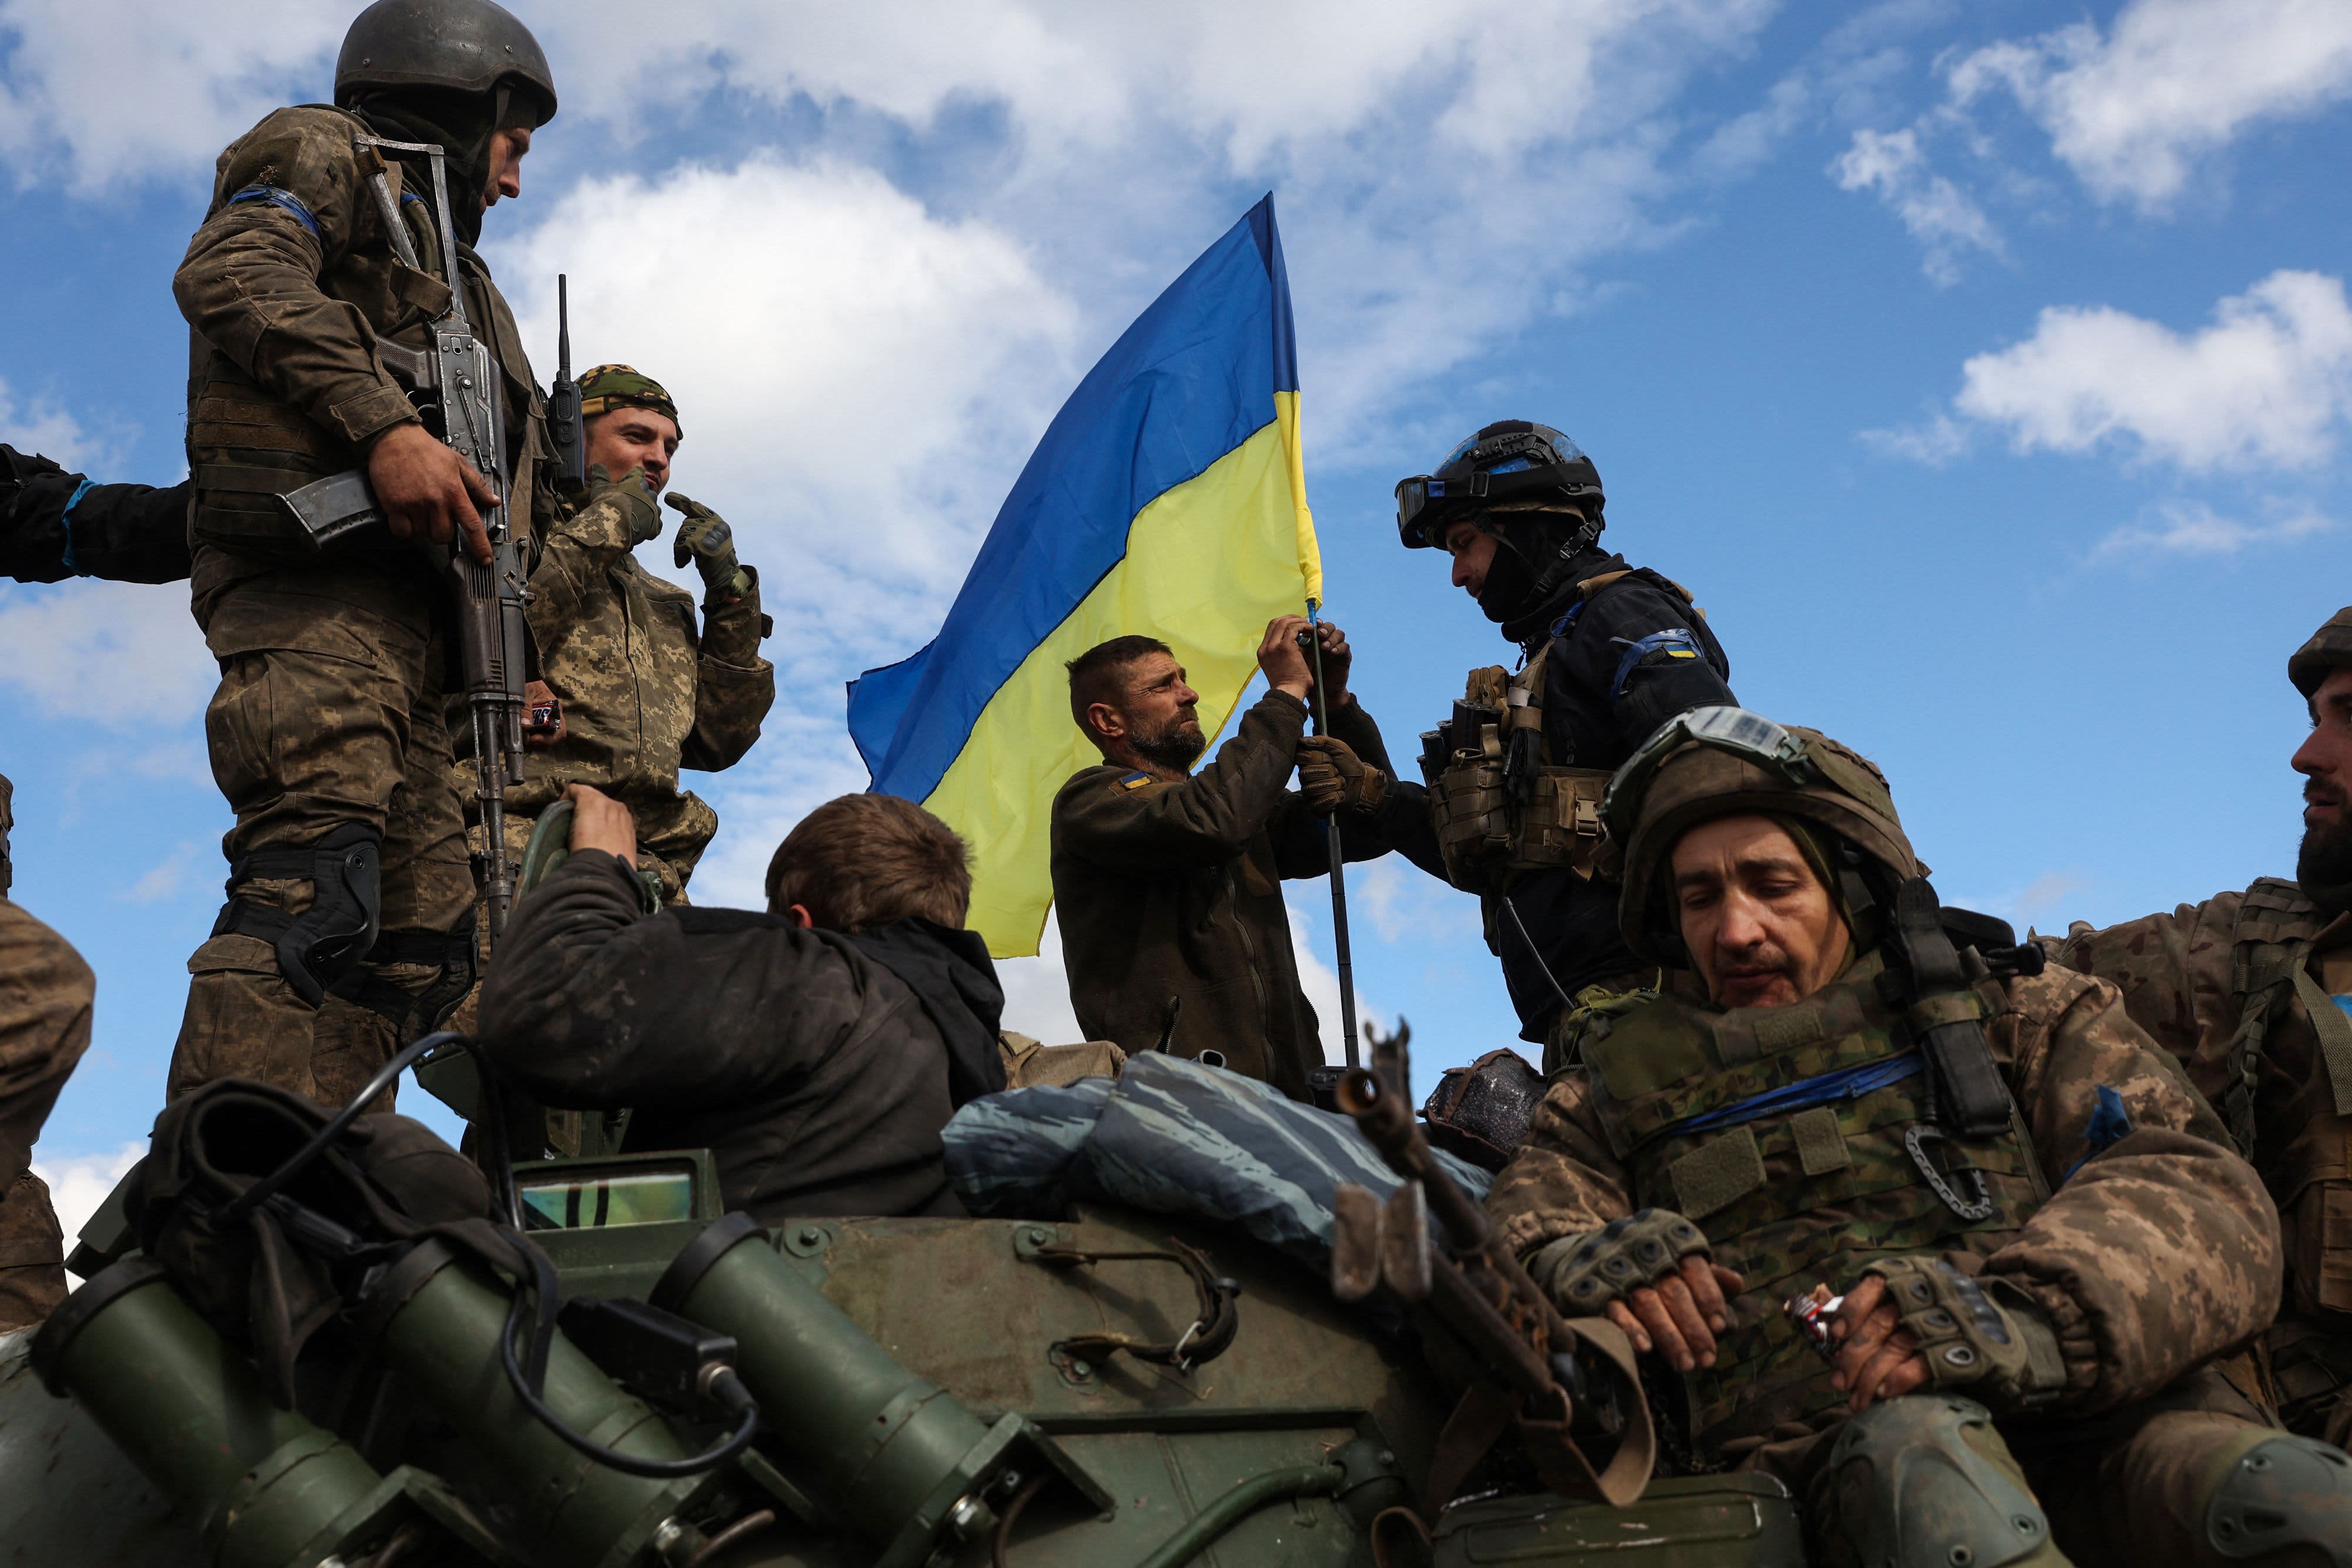 For Russians living abroad and denouncing Ukraine's invasion, a